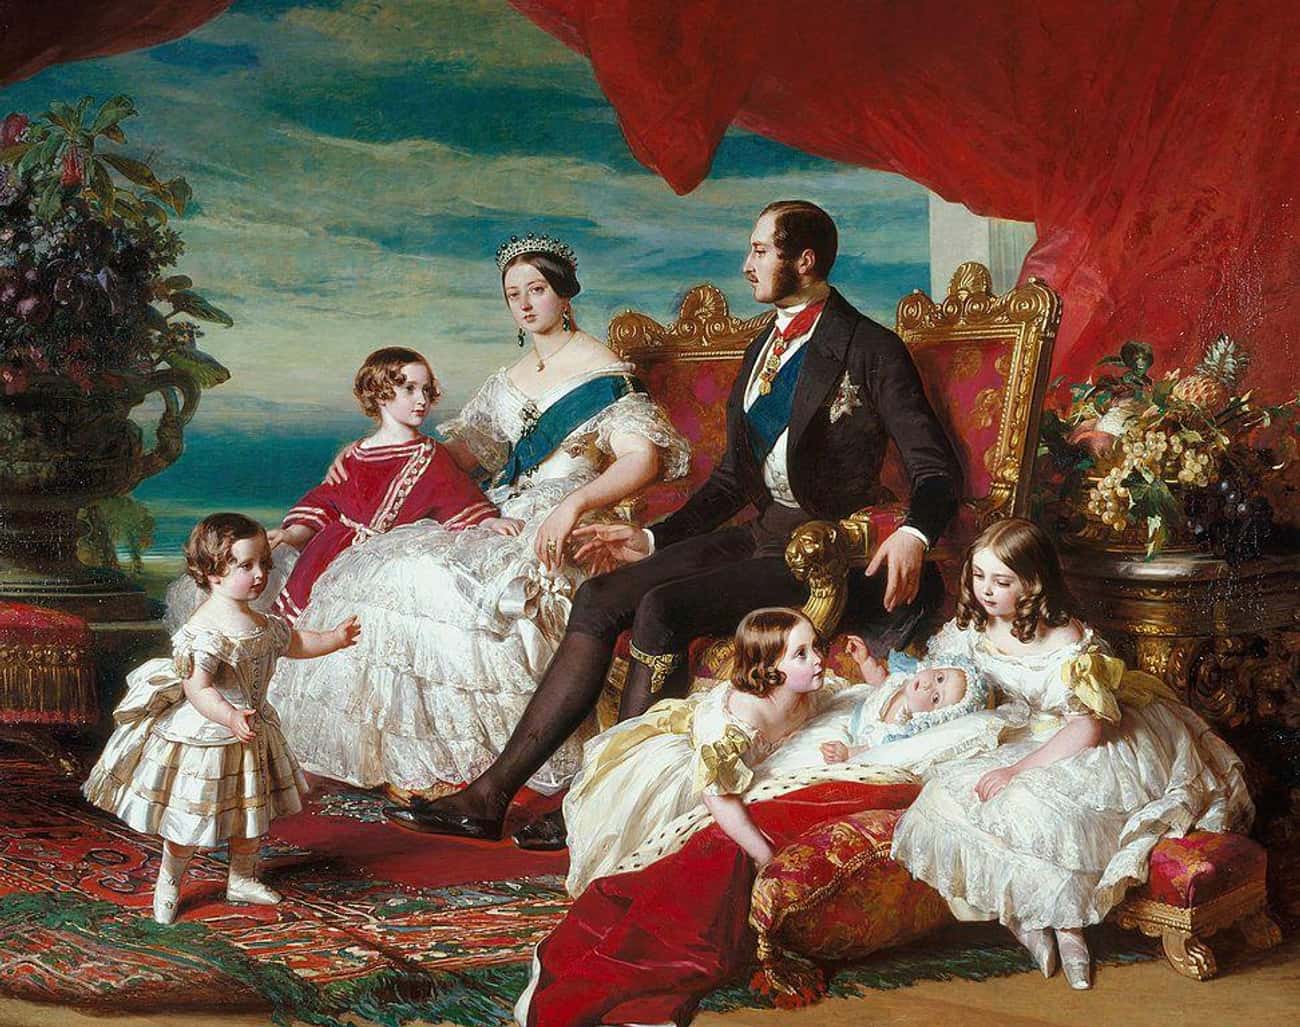 Queen Victoria Is Known As The 'Grandmother of Europe' For Good Reason